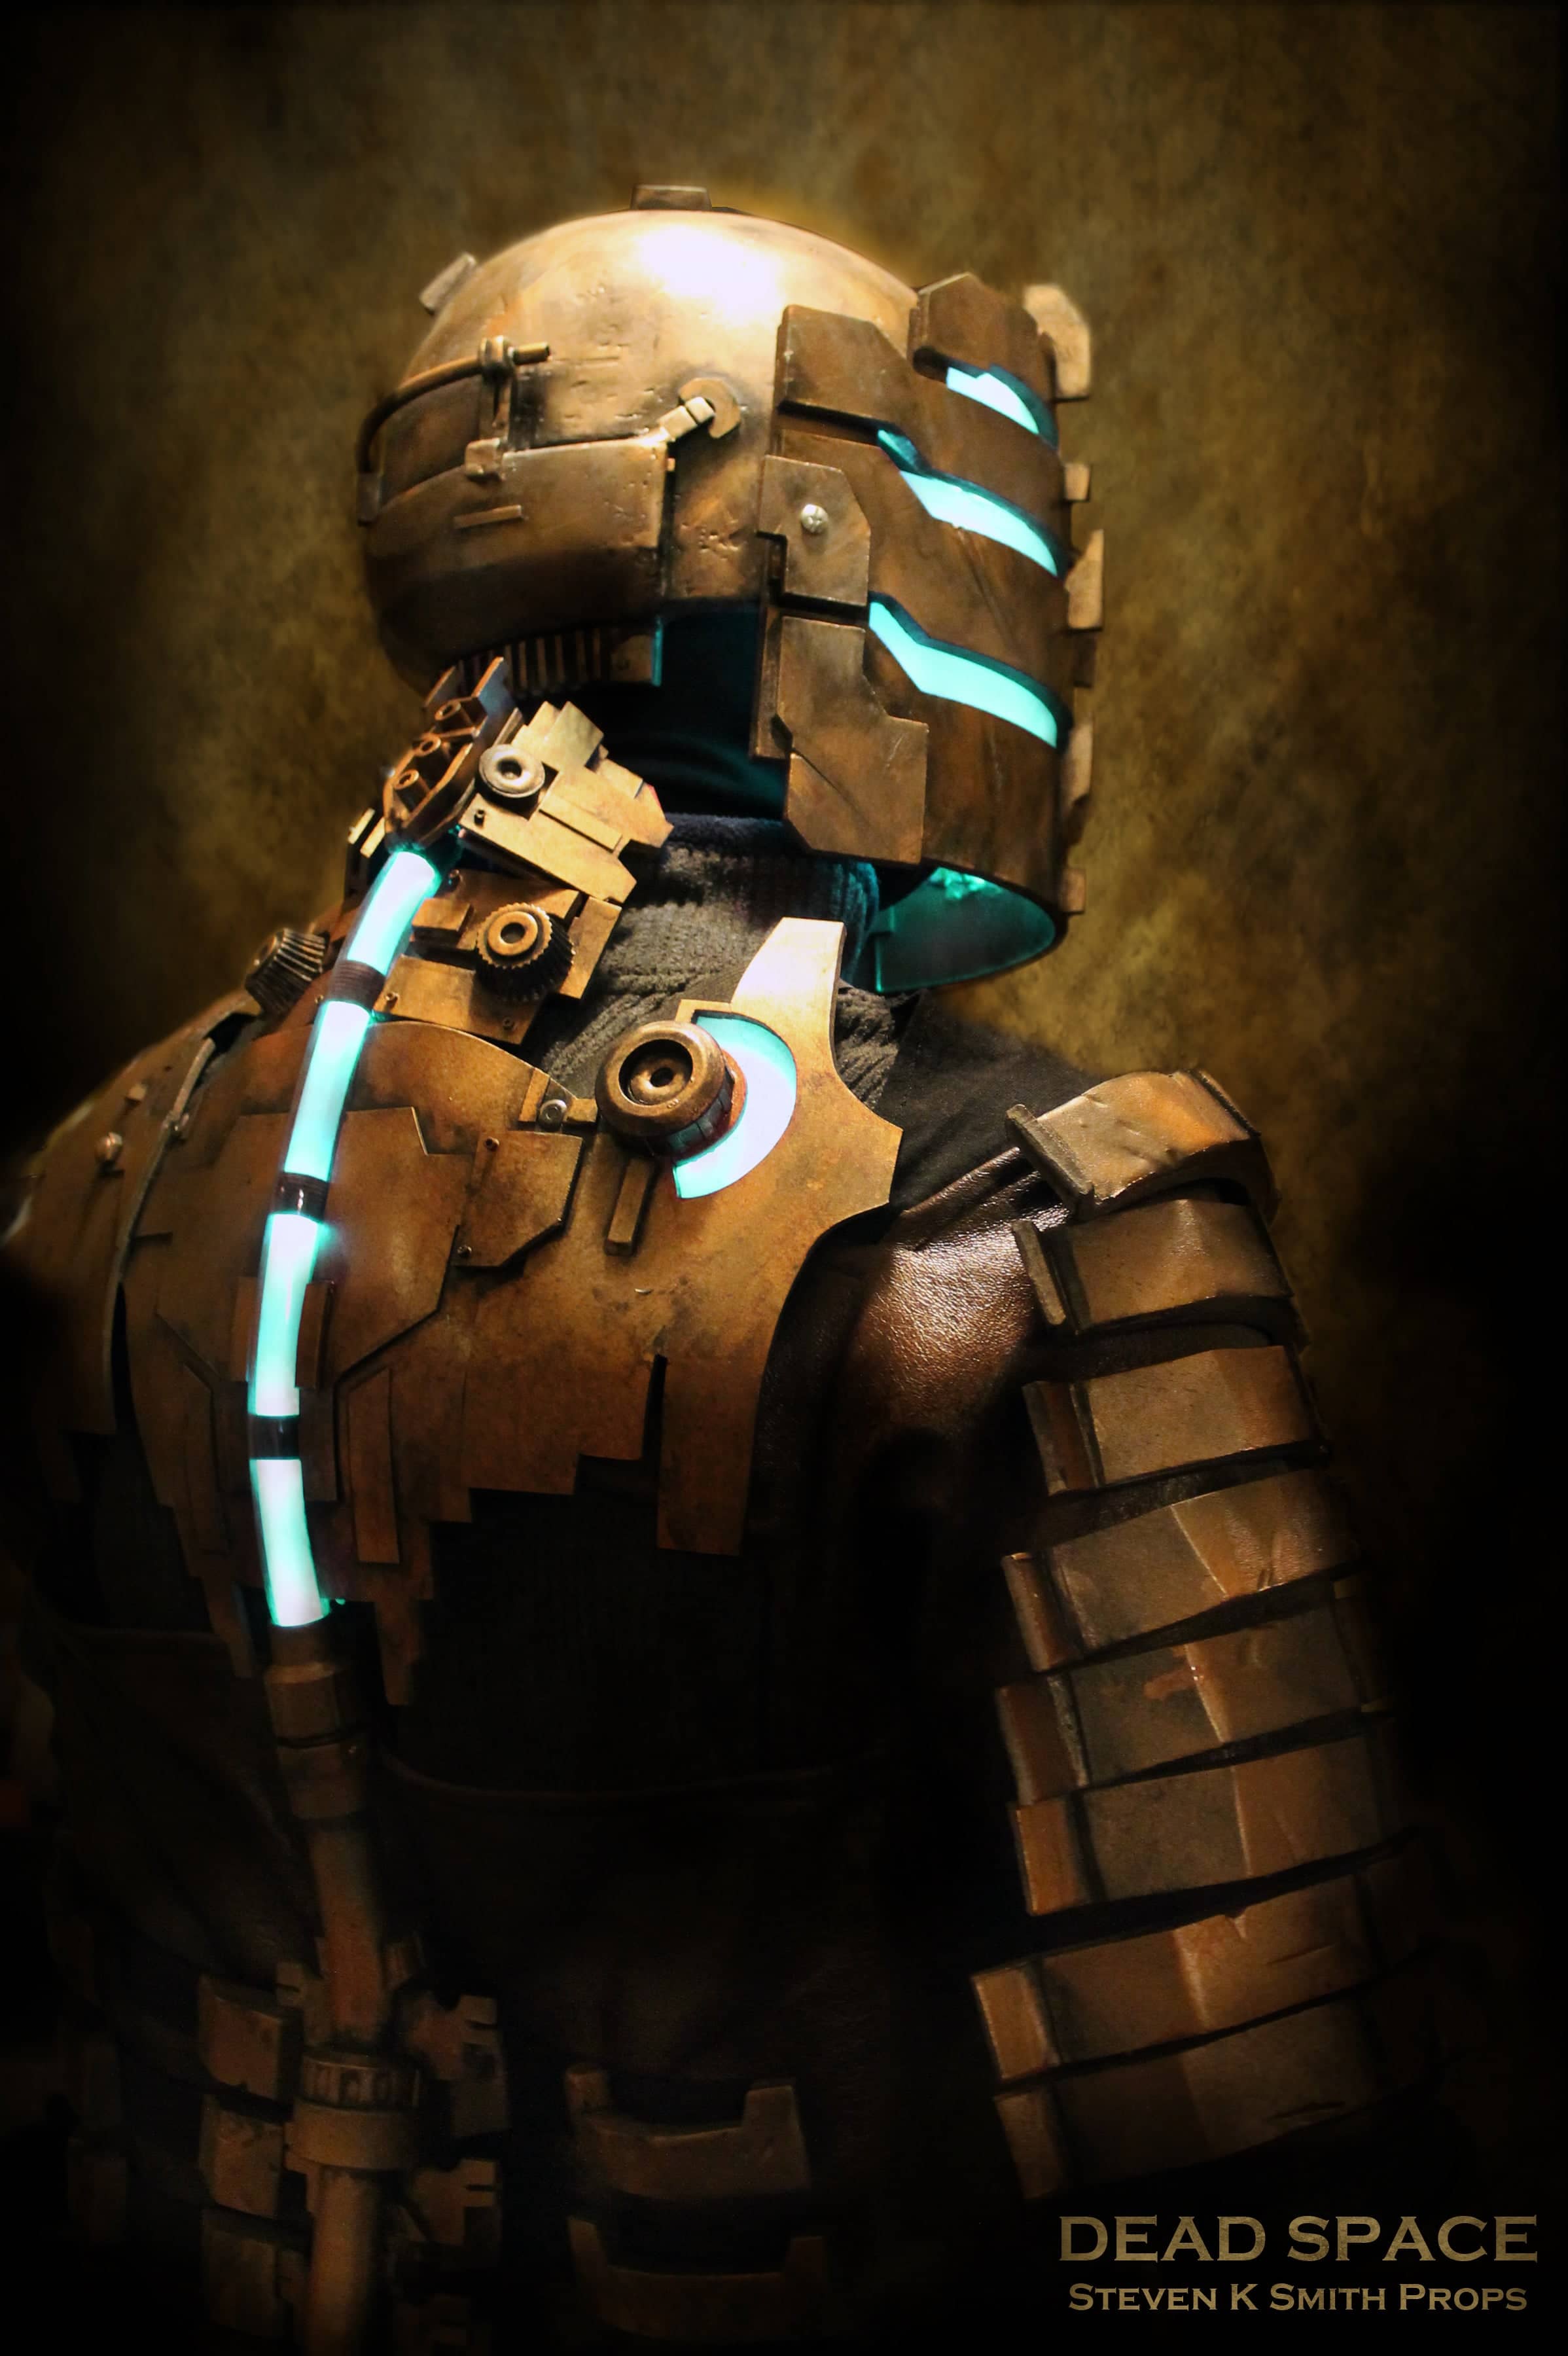 all dead space helmets